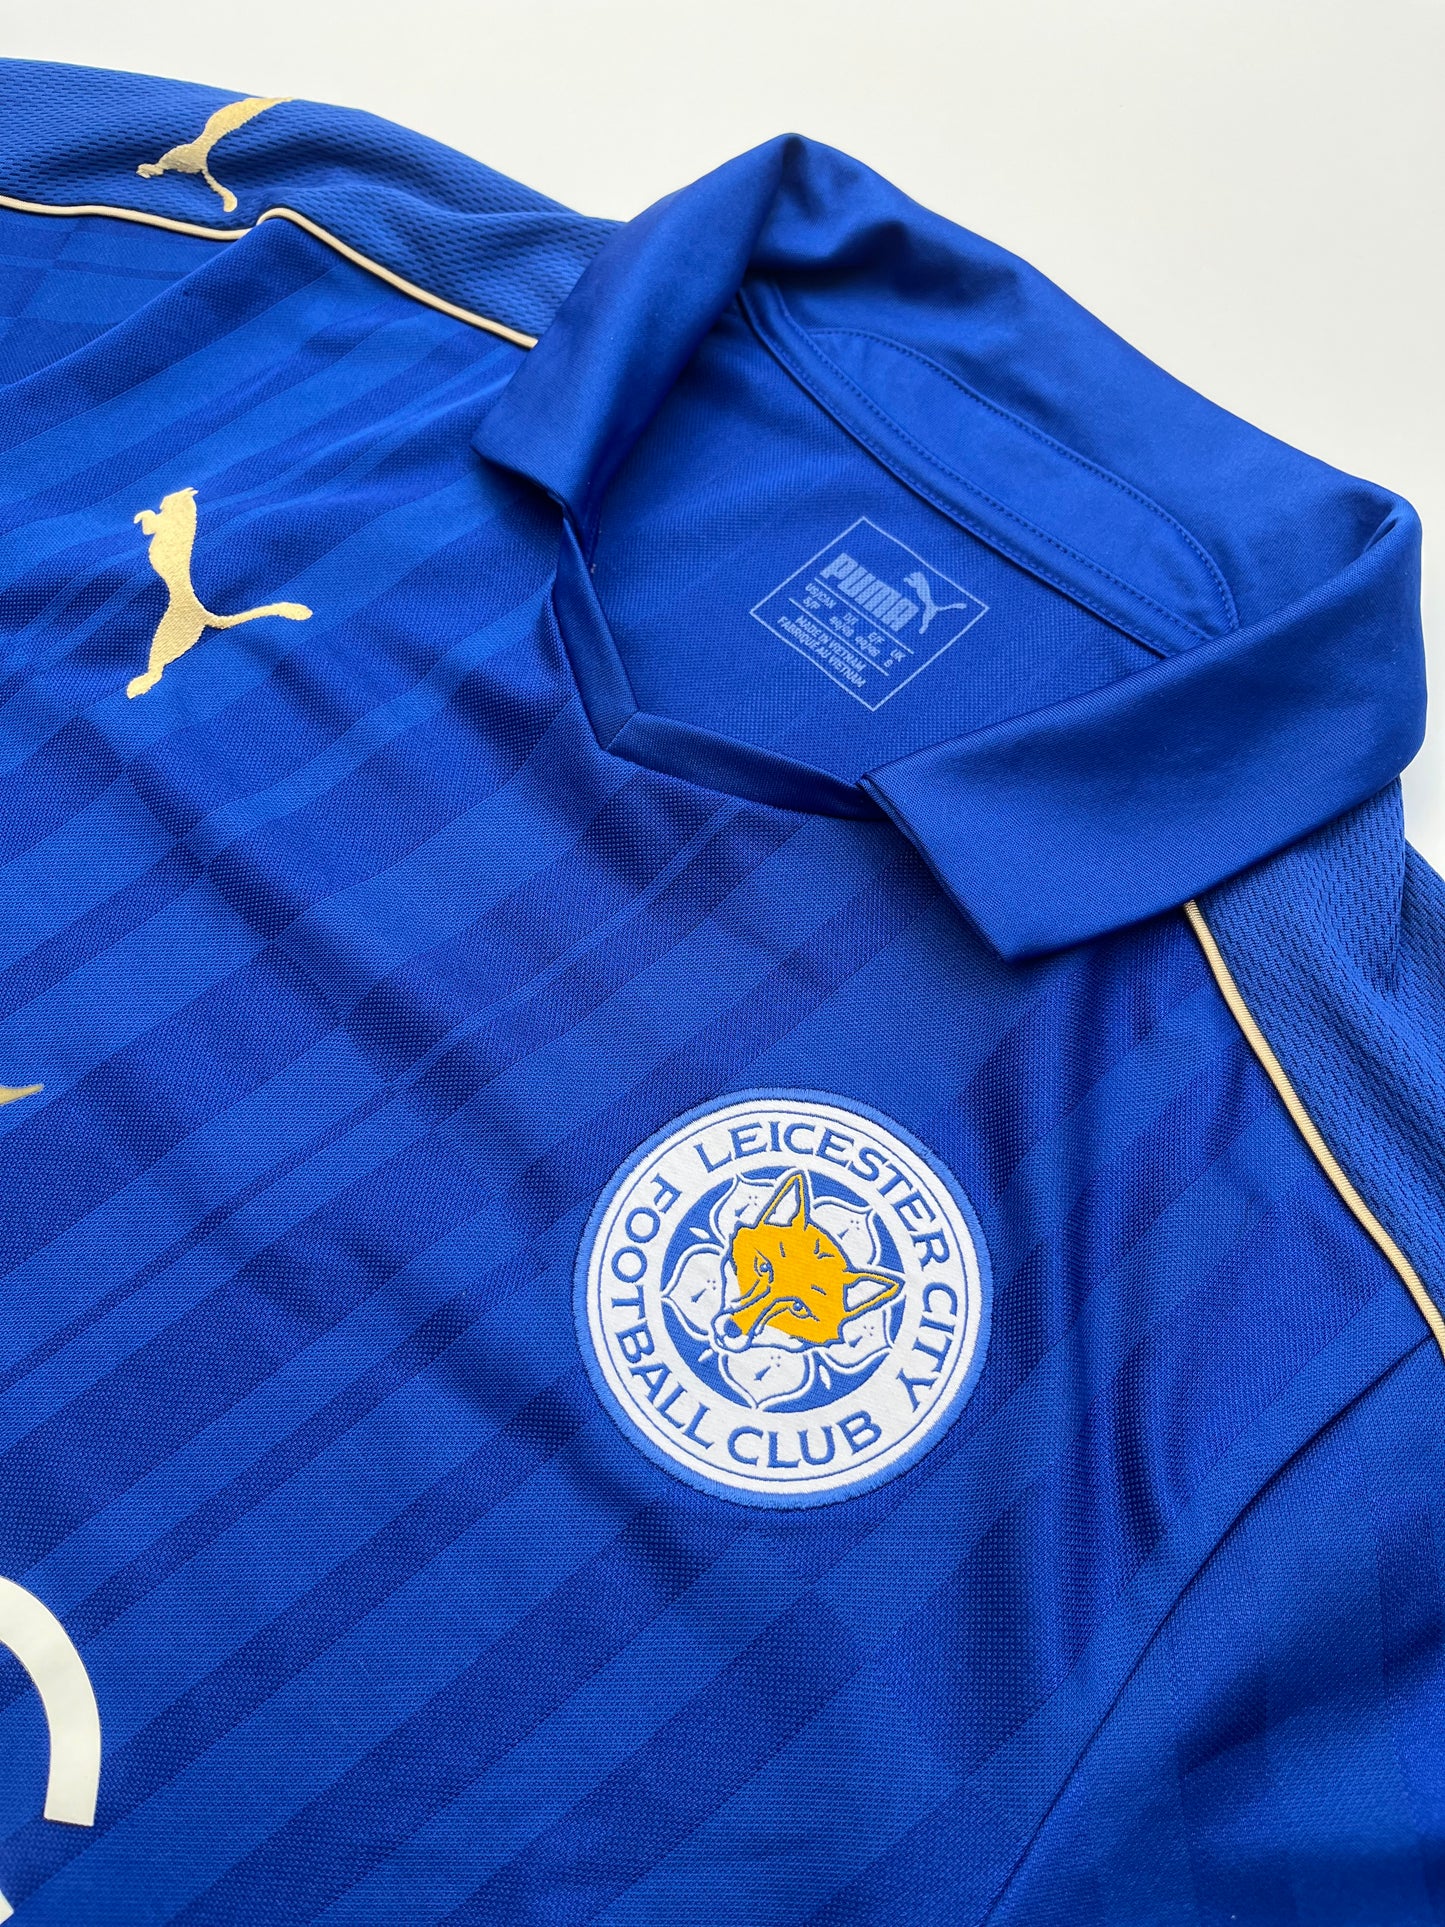 Jersey Leicester City Local 2016 2017 (S)